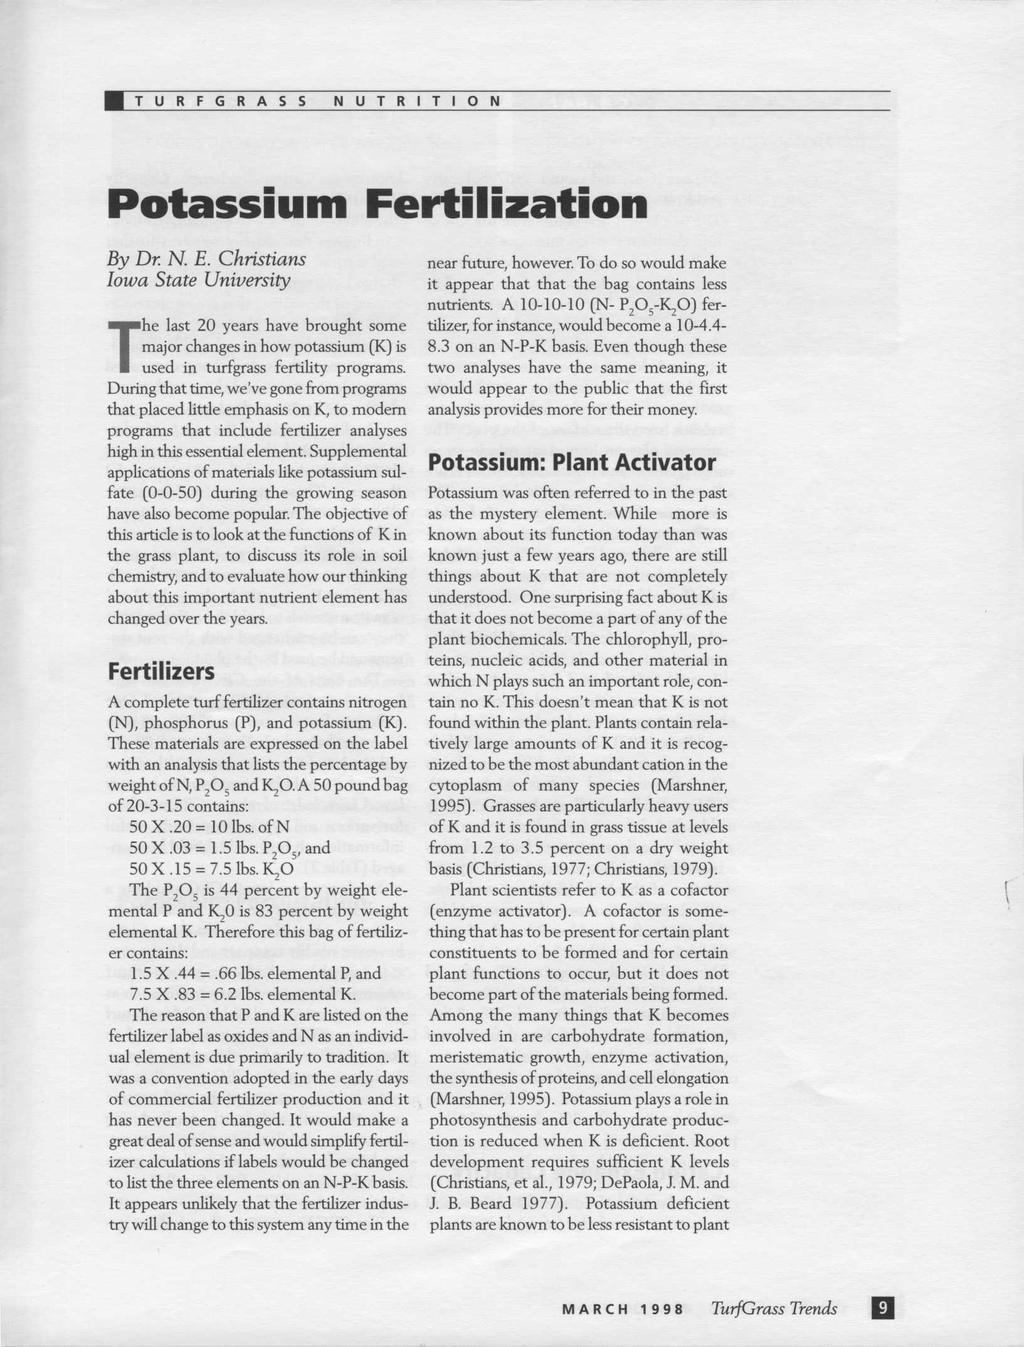 Potassium Fertilization By Dr. N. E. Christians Iowa State University The last 20 years have brought some major changes in how potassium (K) is used in turfgrass fertility programs.